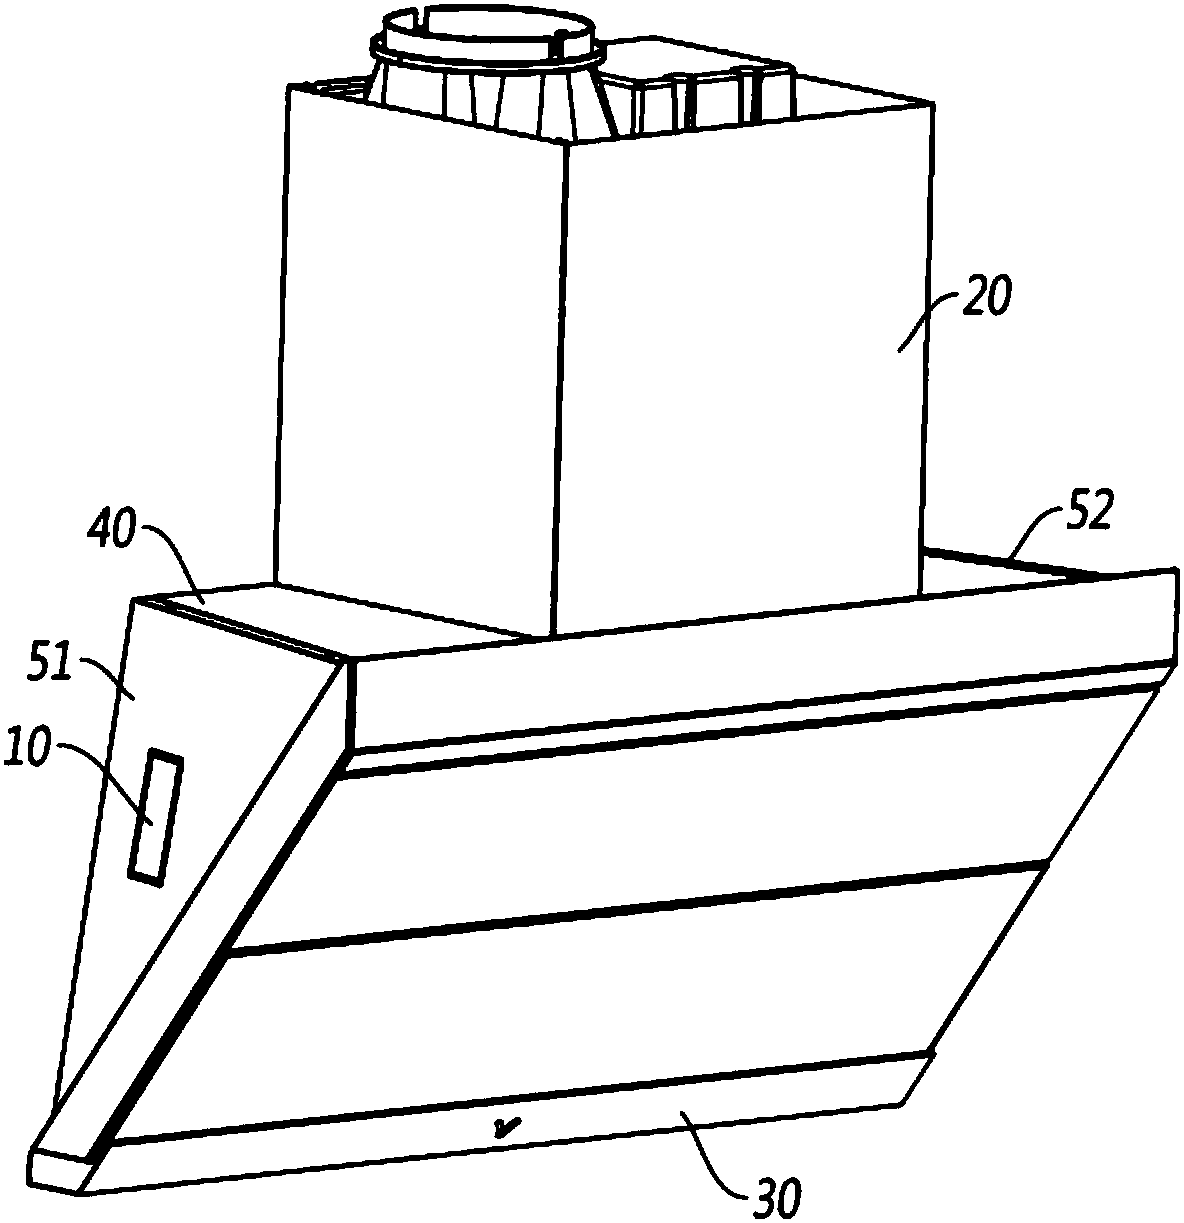 Extractor hood and integrated type steam generation module thereof